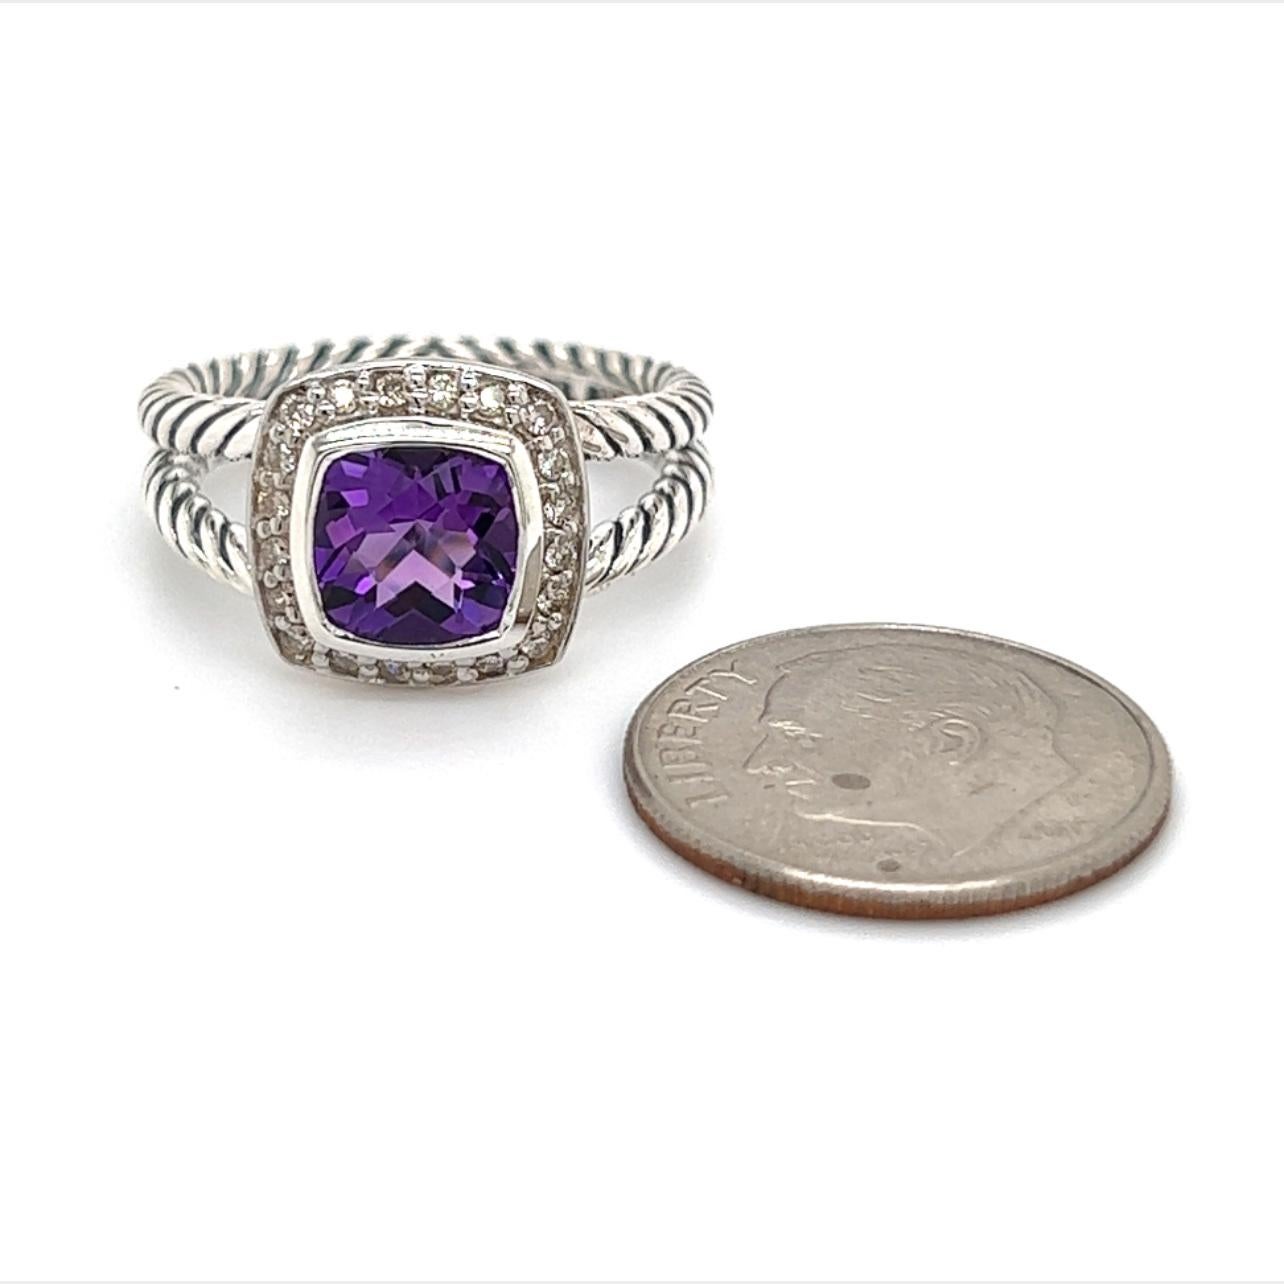 David Yurman Authentic Estate Diamond Petite Albion Amethyst Ring 6.5 1.67 TCW In Good Condition For Sale In Brooklyn, NY